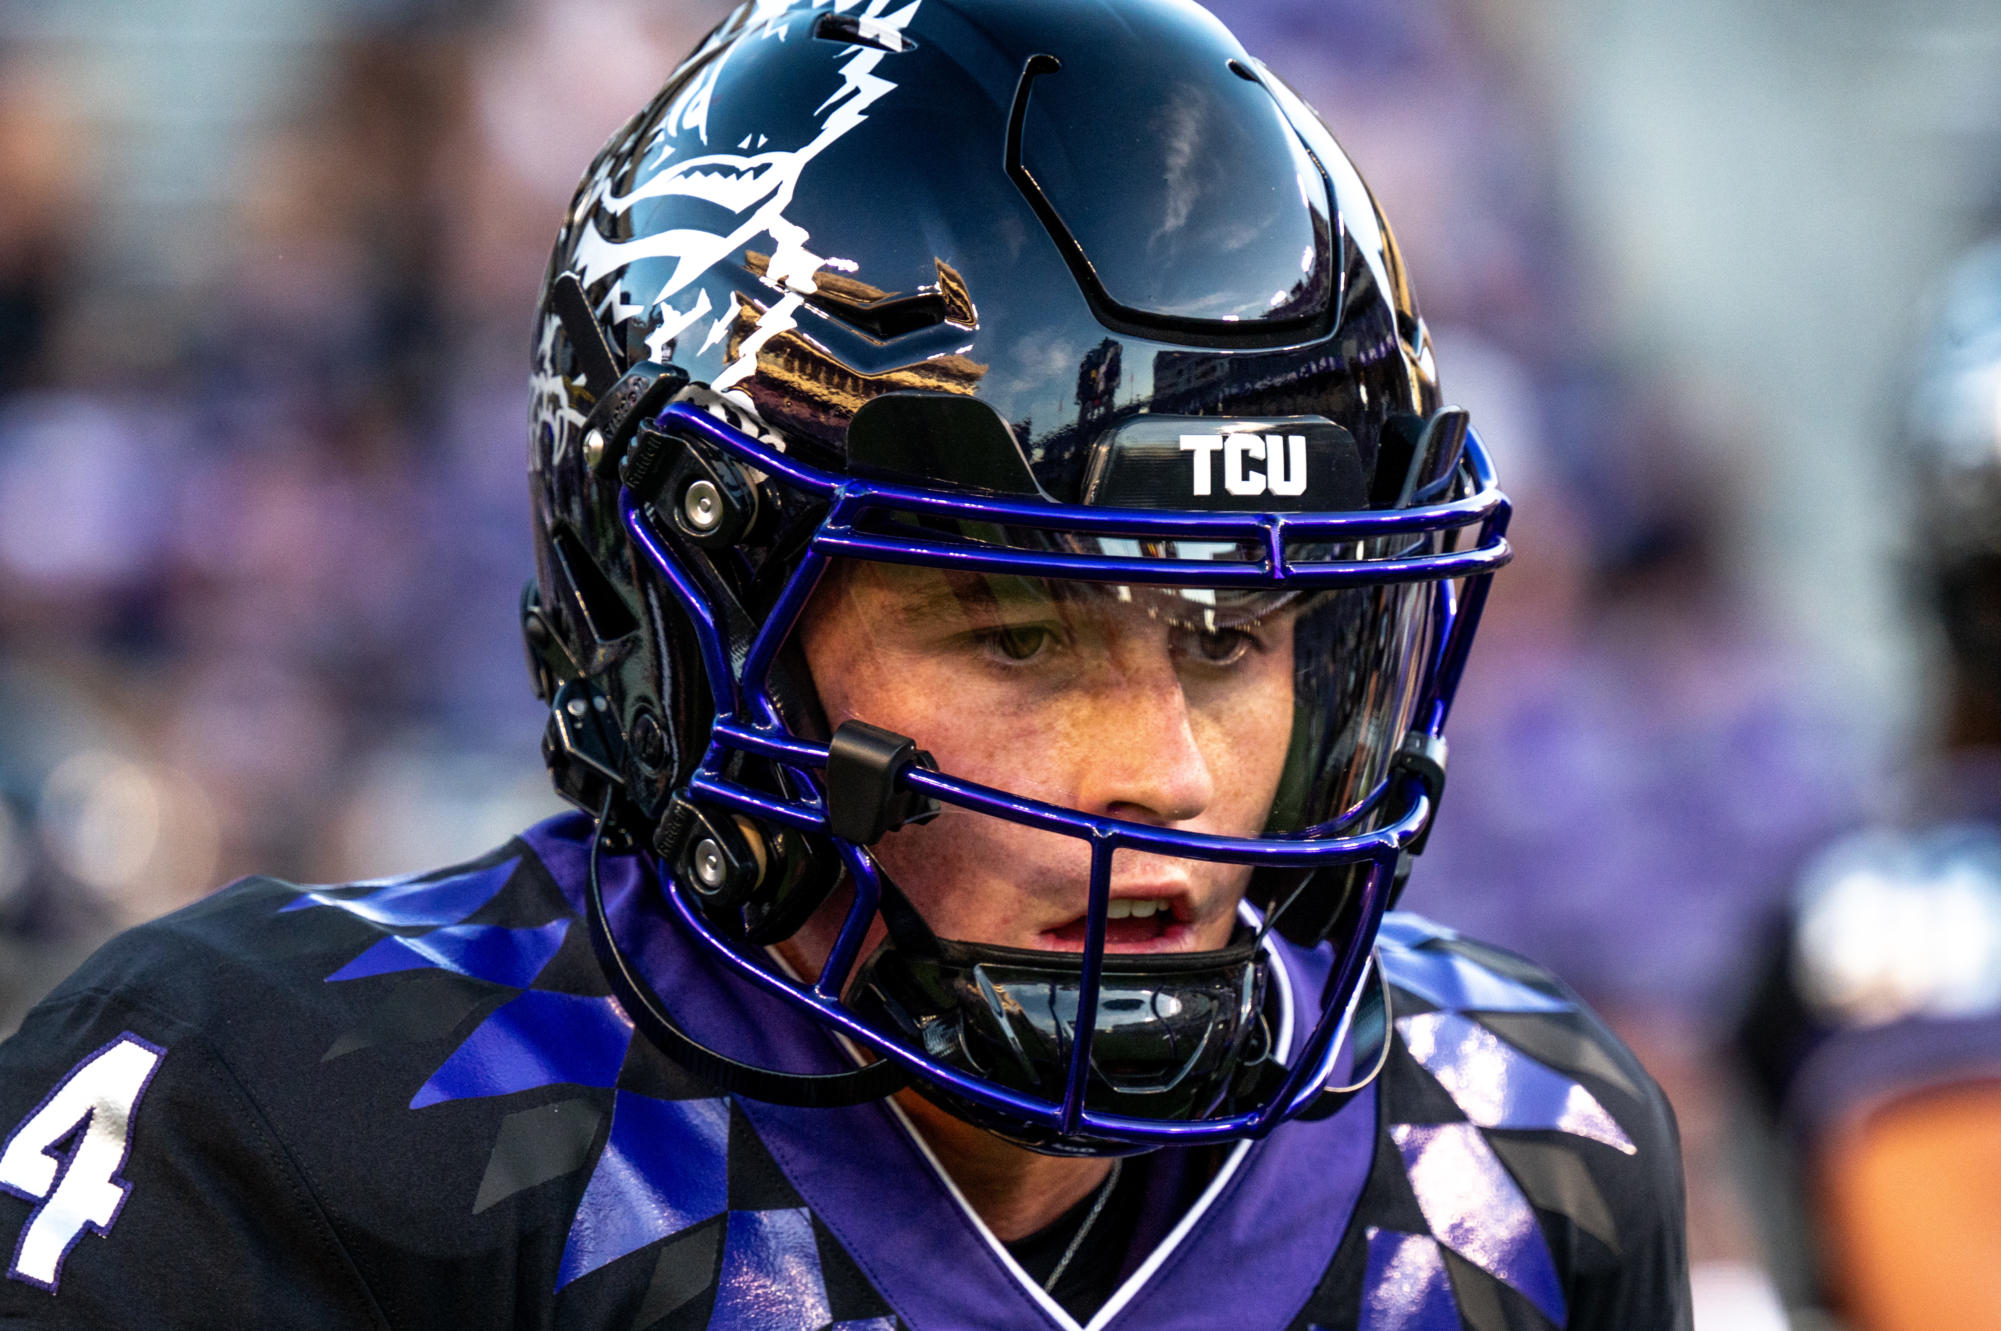 Texas Christian University quarterback Chandler Morris warms up pre-game at Amon G. Carter Stadium in Fort Worth, Texas, Sept. 30, 2023. The TCU Horned Frogs were defeated by the West Virginia Mountaineers 24-21.